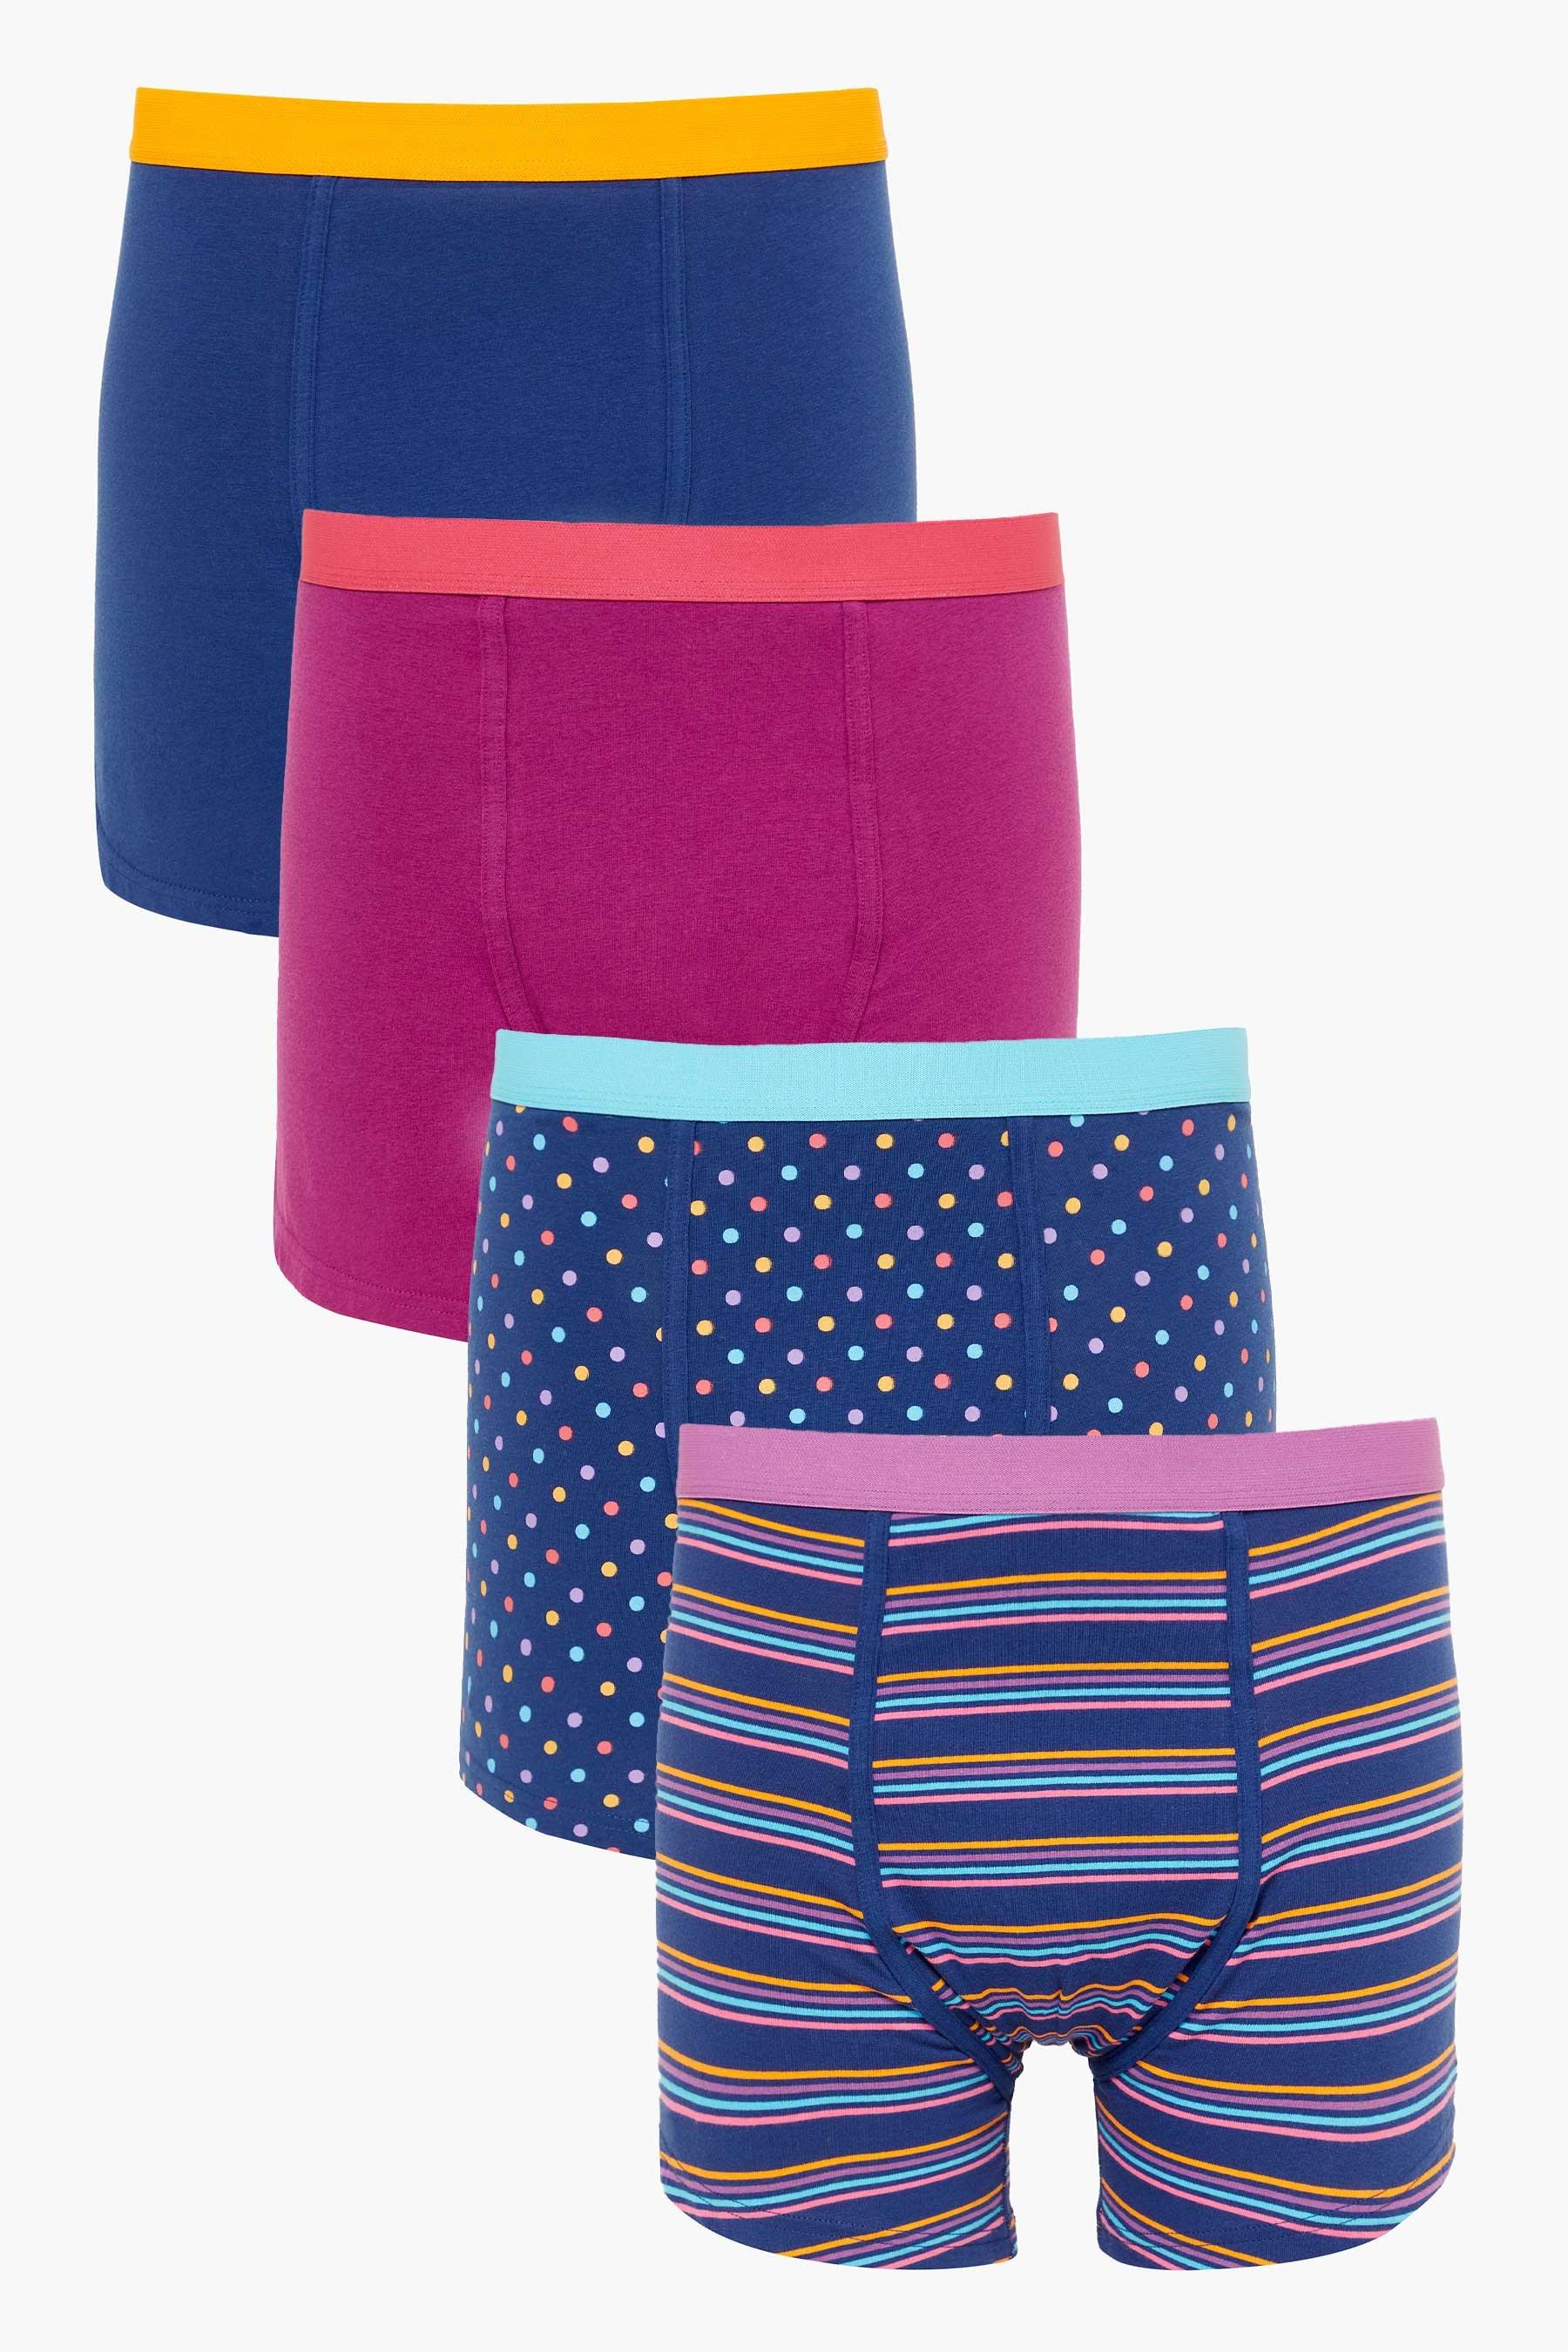 pack of 4 colour waistband fashion navy/purple/multi trunks - mens - blue - size: small